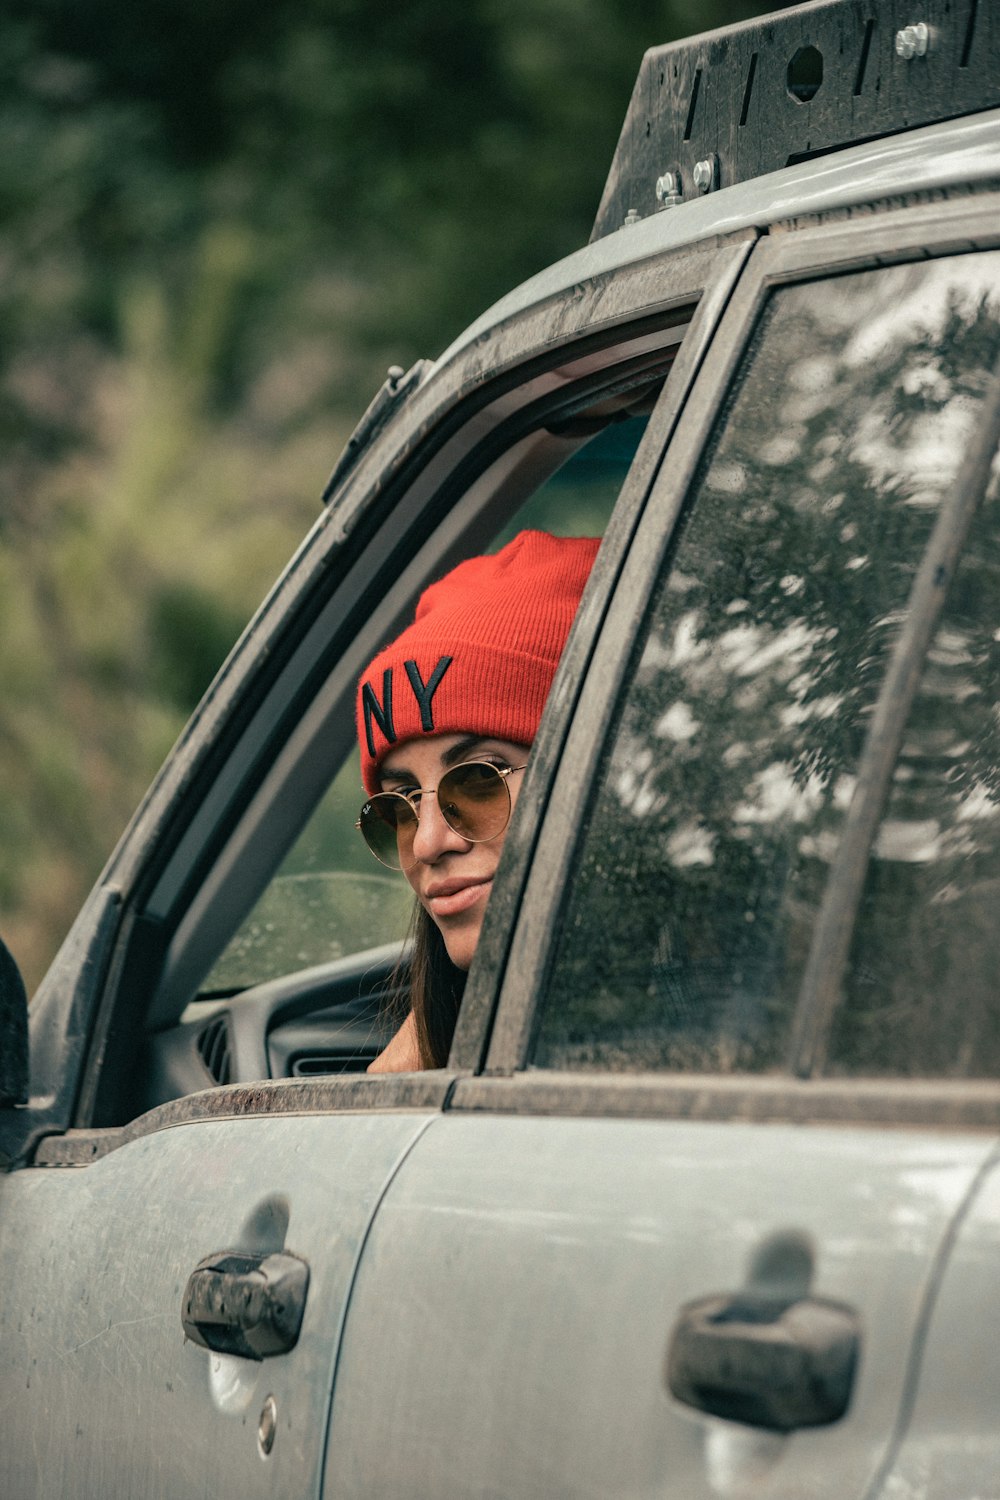 a woman wearing a red hat and sunglasses sitting in a car